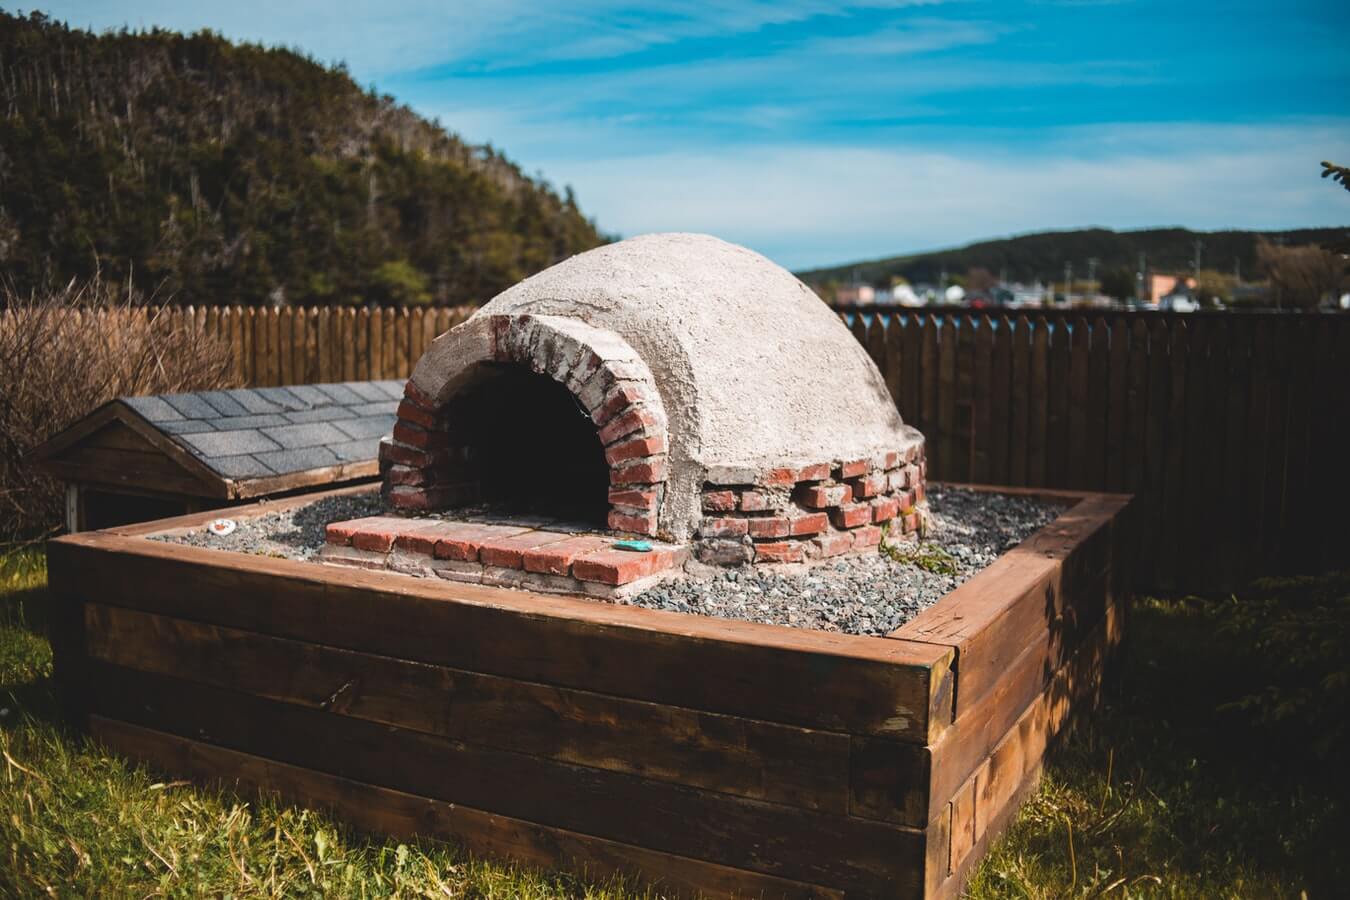 Diy Outdoor Pizza Oven How To Build, How Much To Build An Outdoor Pizza Oven